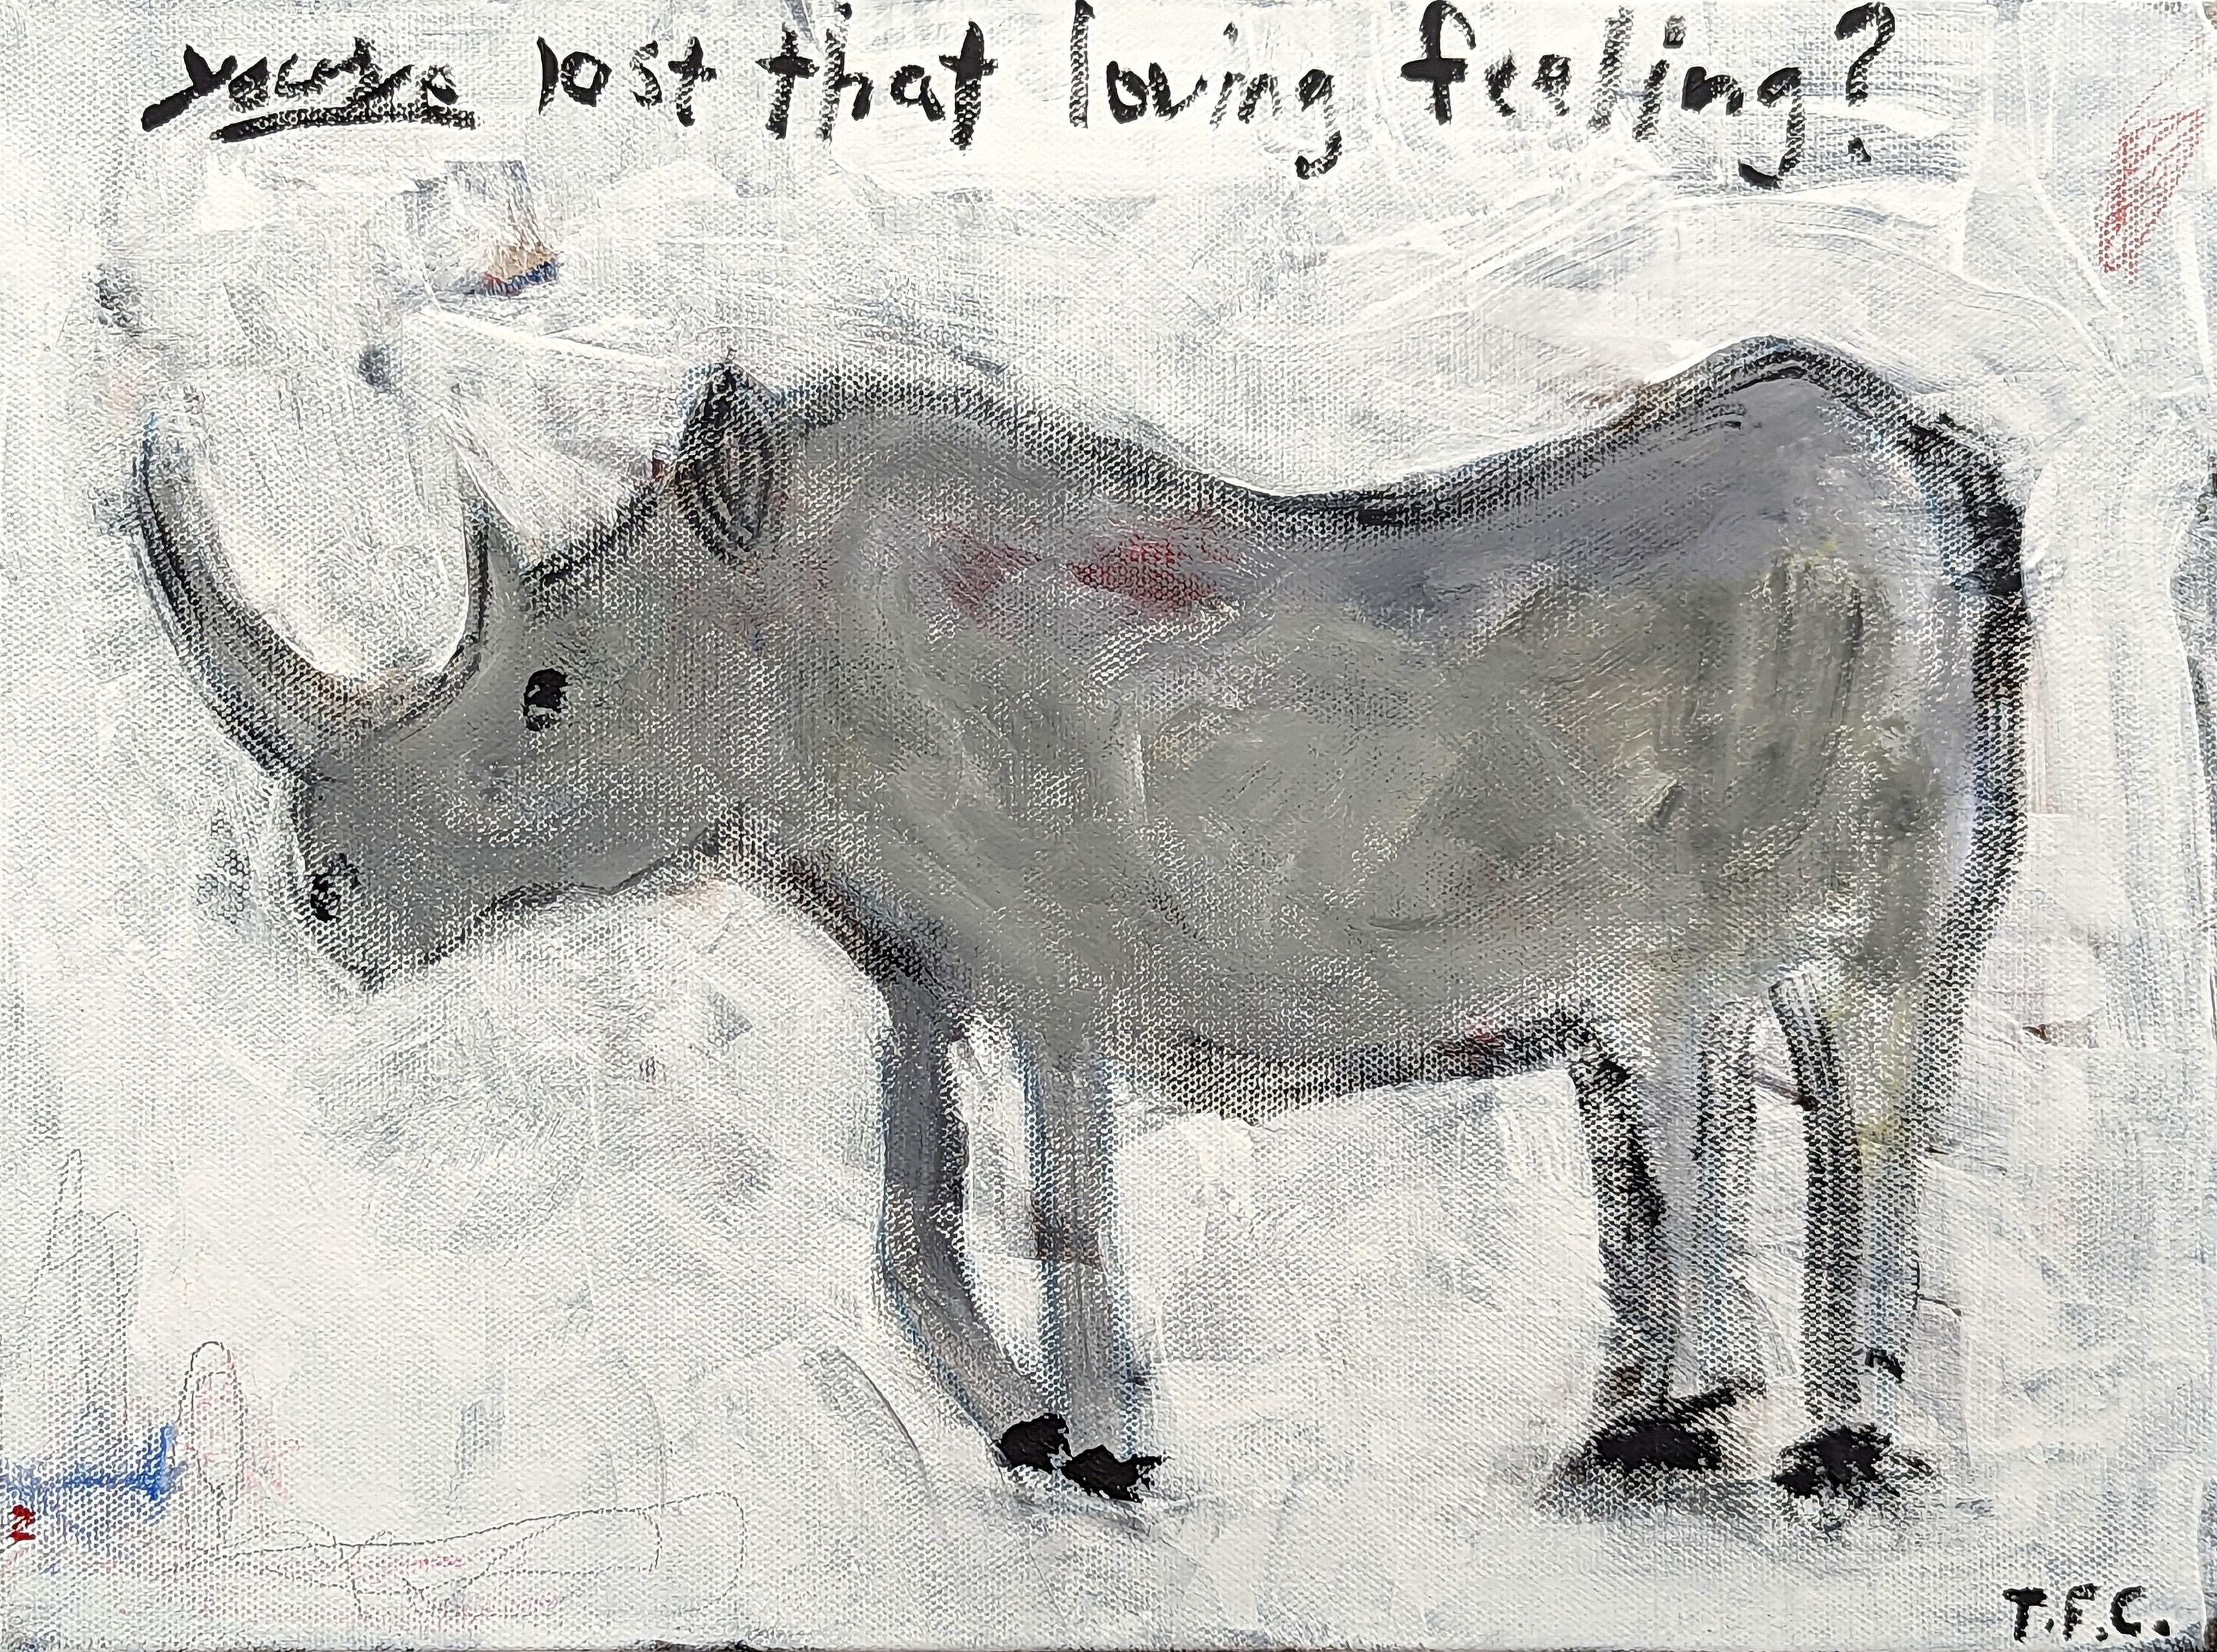 Abstract animal painting by contemporary artist Tyler Casey. The work features a gestural depiction of a rhino with the phrase "you've lost that loving feeling?" written above it. Signed in the front lower right corner. 

Artist Biography: Tyler